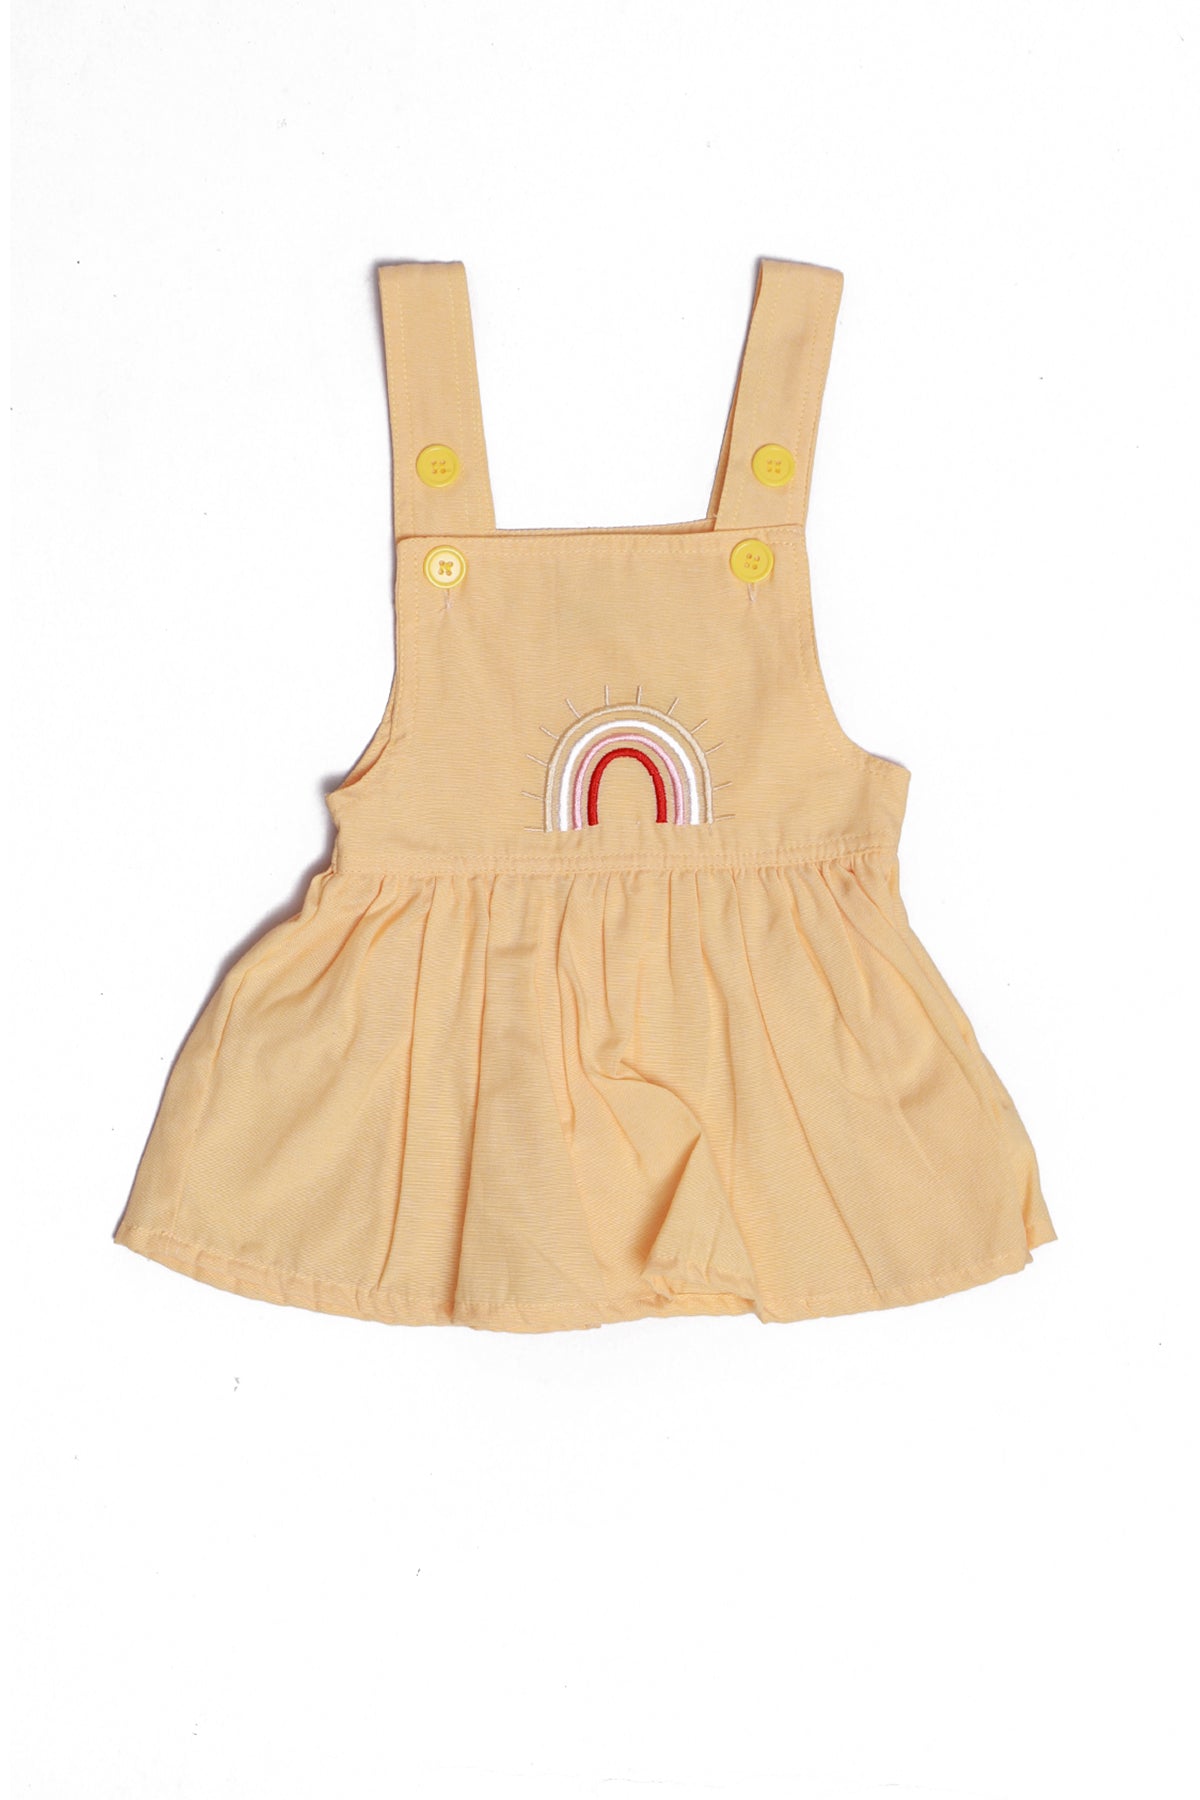 Ozone Baby Girls Casual Pinafore